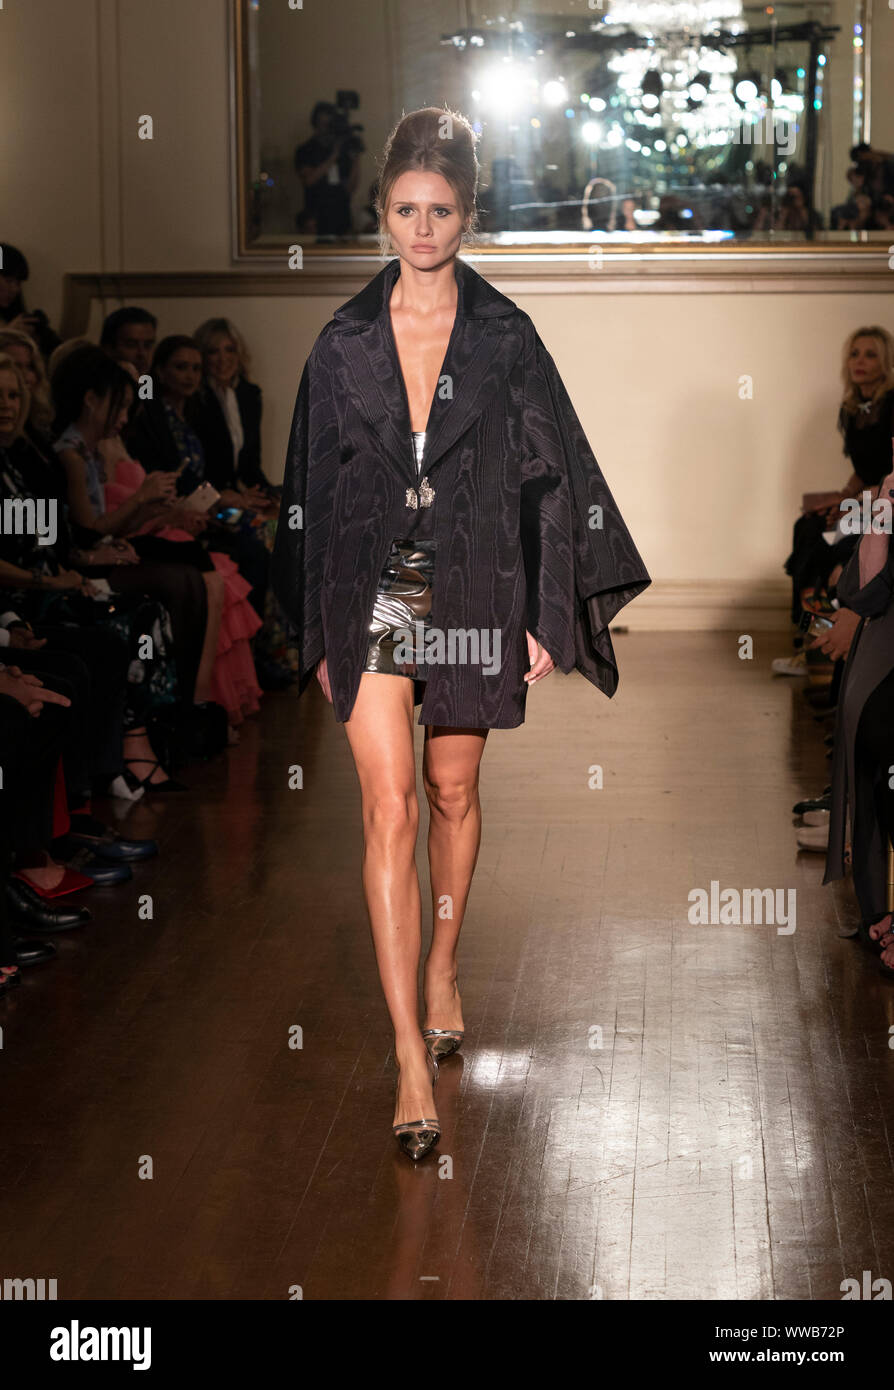 New York, NY - September 10, 2019: Model walks runway for Zang Toi 30th anniversary Spring/Summer 2020 show during fashion week at 3 West Club Stock Photo